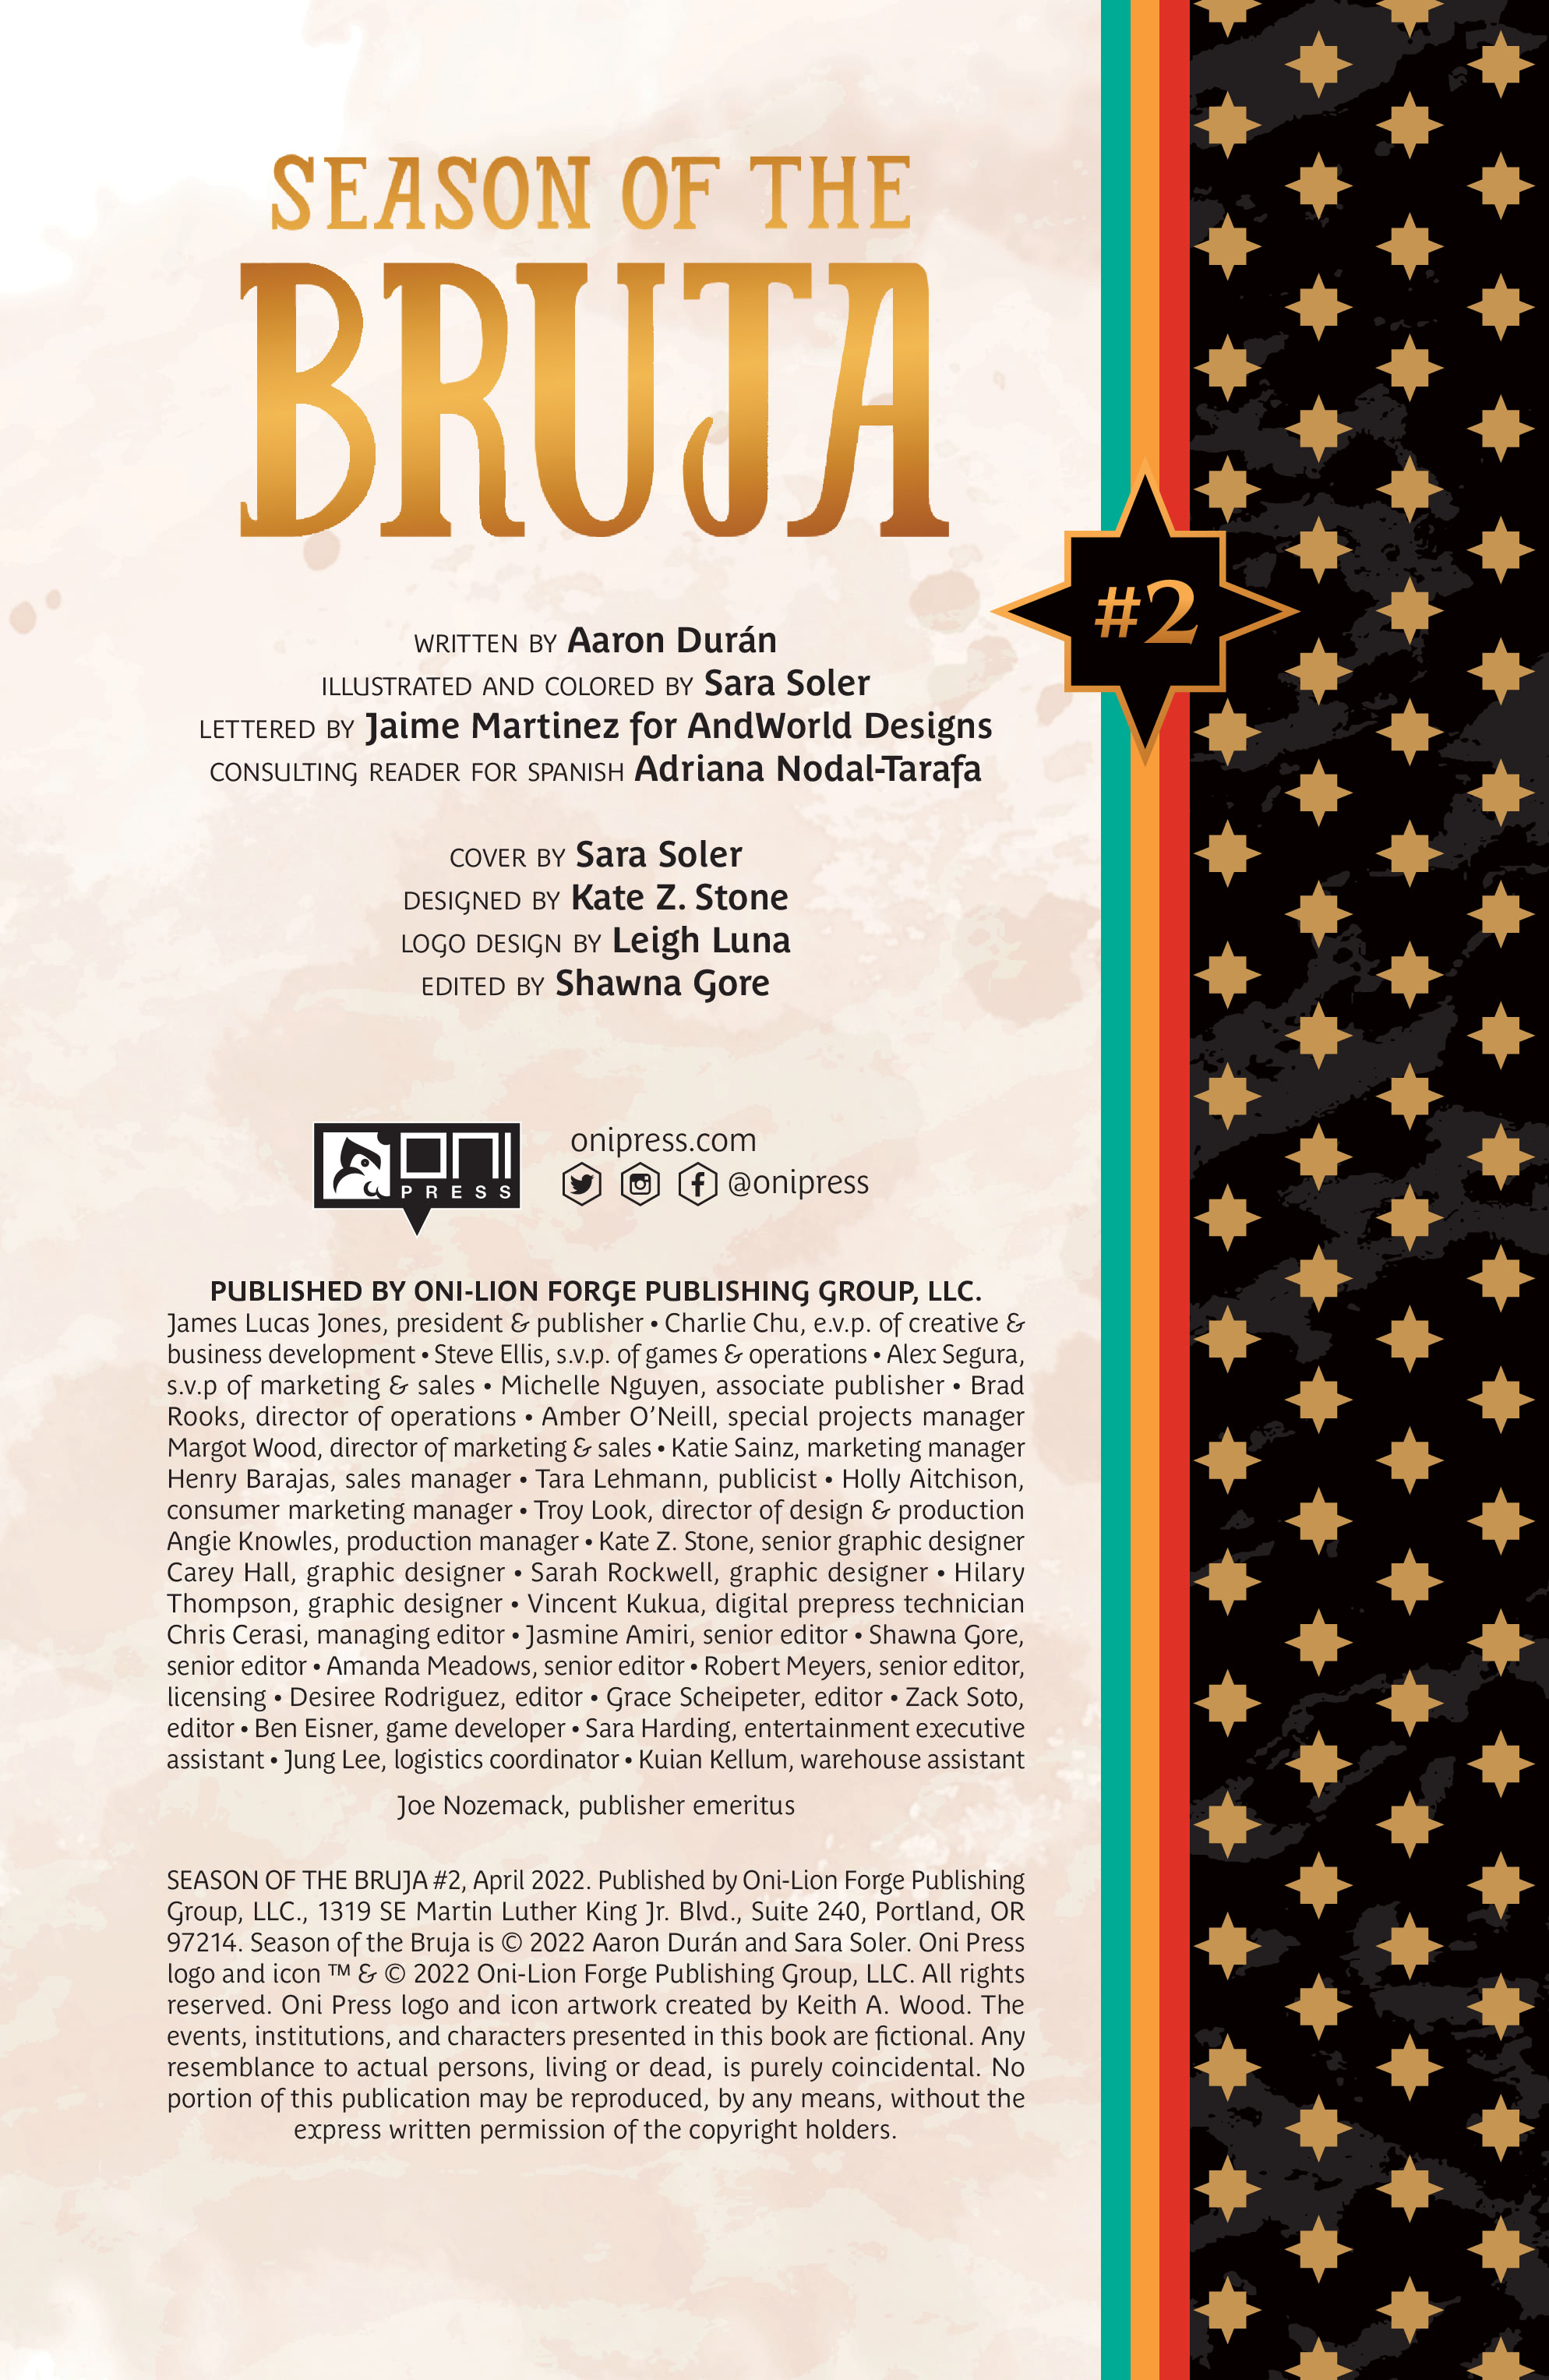 Read online Season of the Bruja comic -  Issue #2 - 2